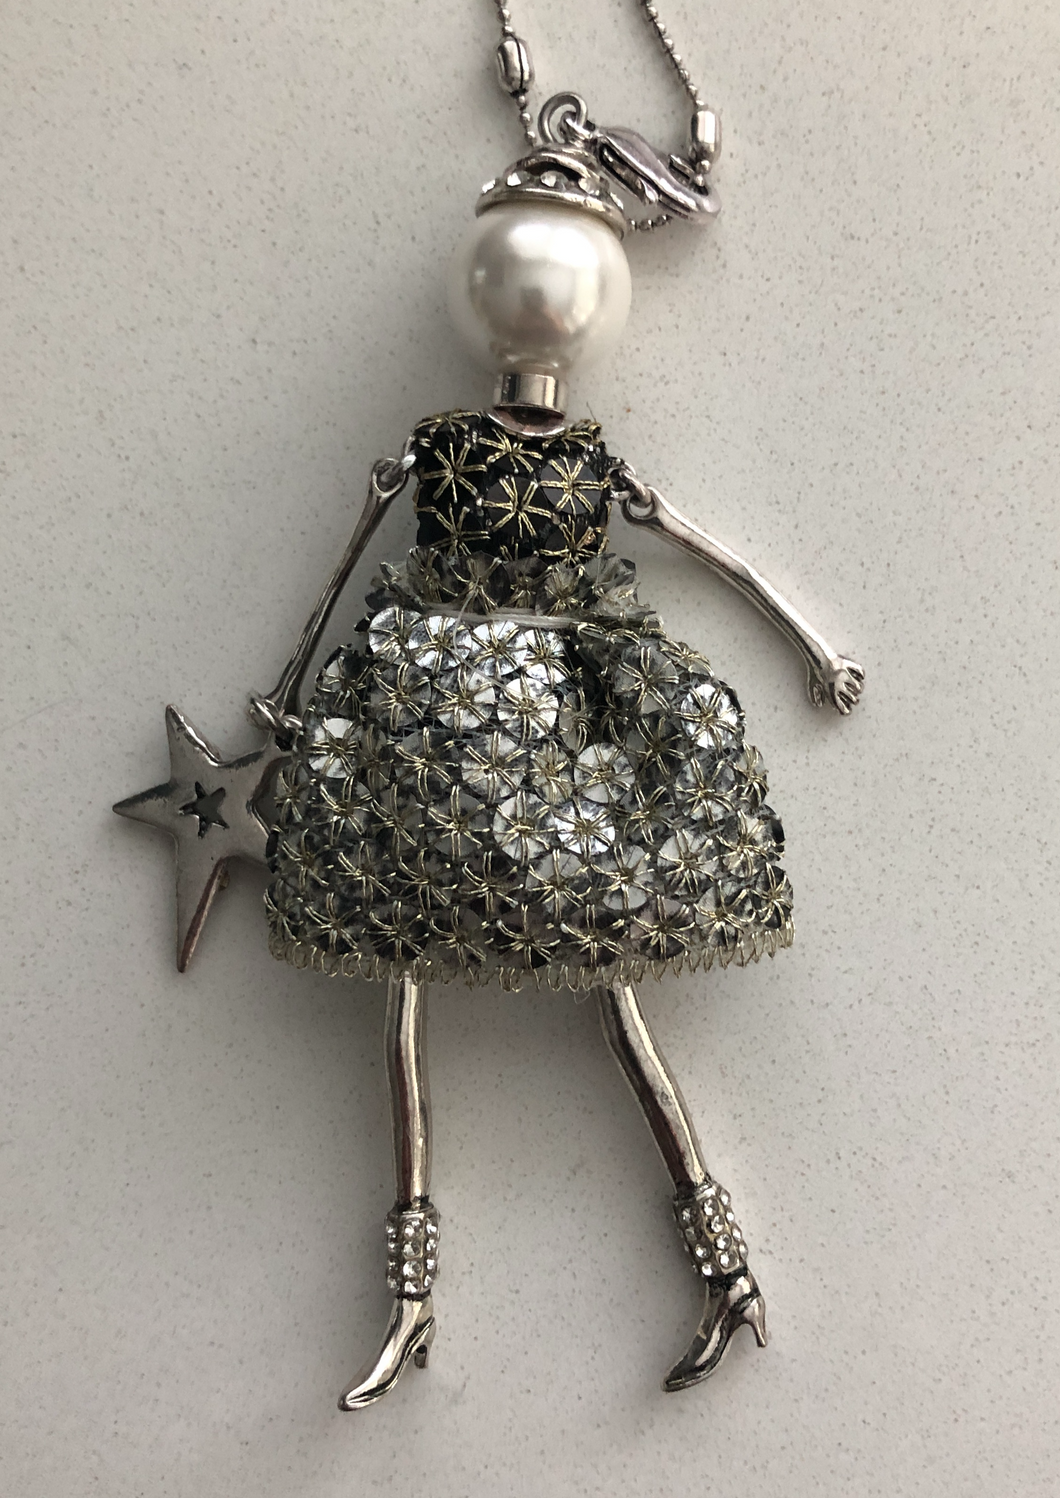 A 9CT GOLD - GEM SET RAG DOLL PENDANT - APPROXIMATE WEIGHT 12.5 GRAMS